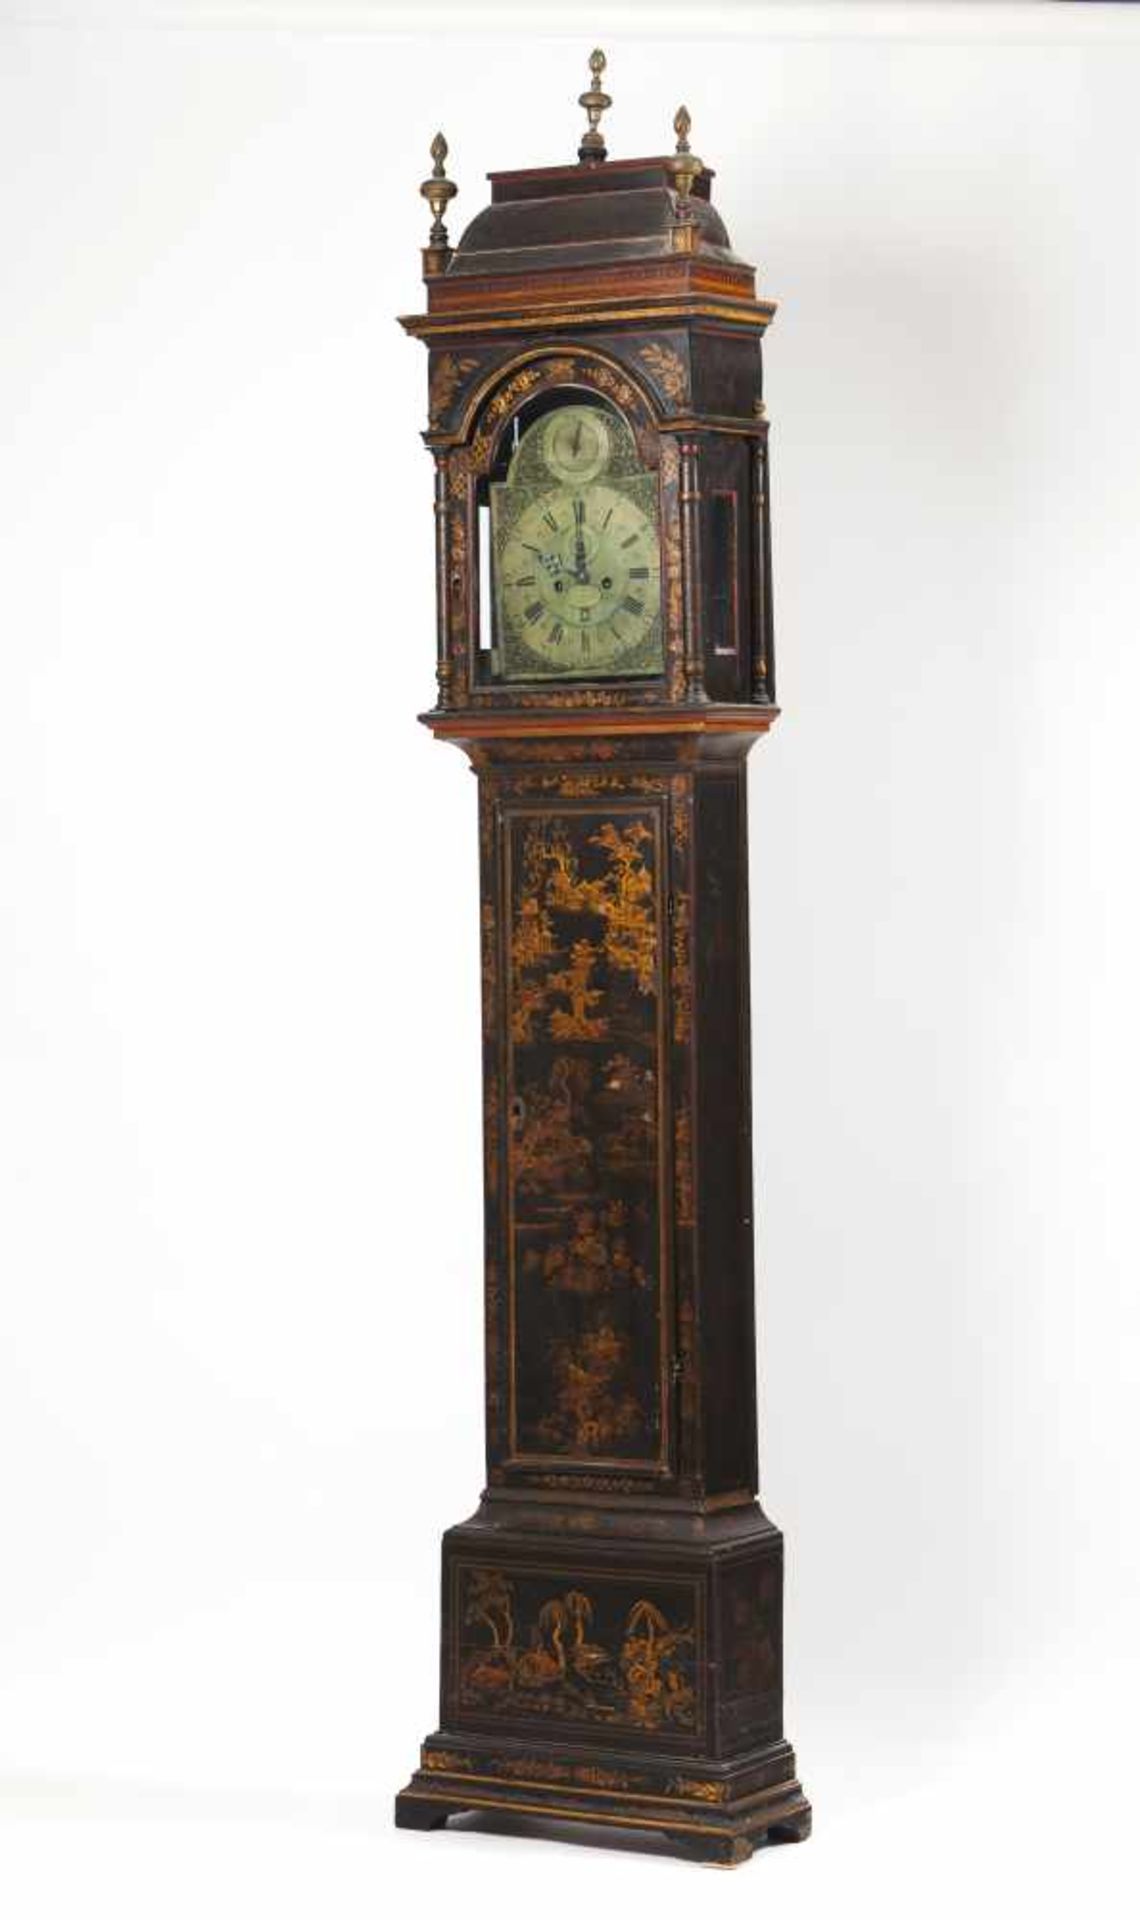 A William Webster longcase clockBrass face of raised decoration showing hours, minutes, seconds